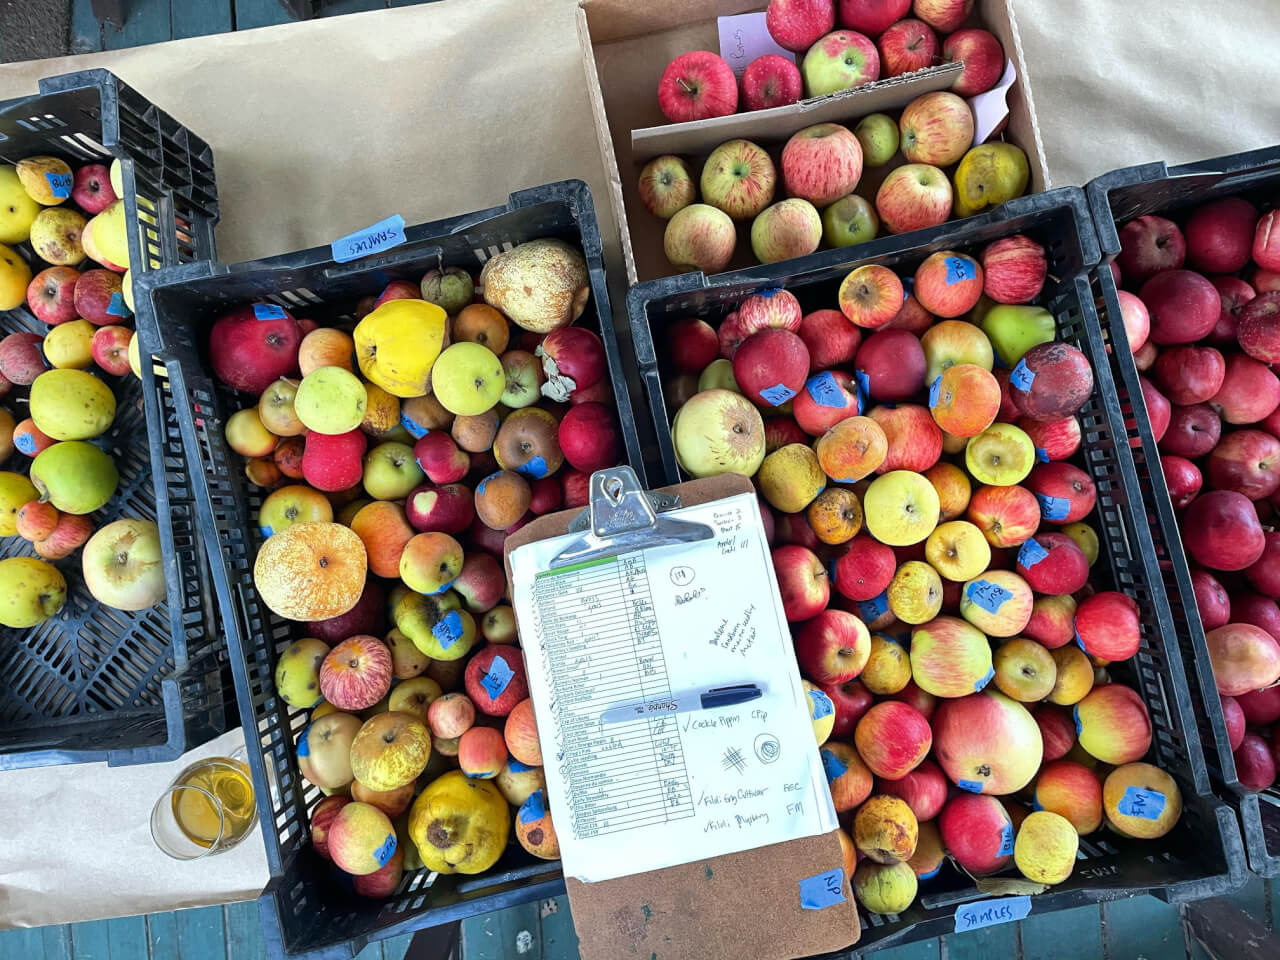 Can't Get Enough of Those Honeycrisp Apples - New England Apples